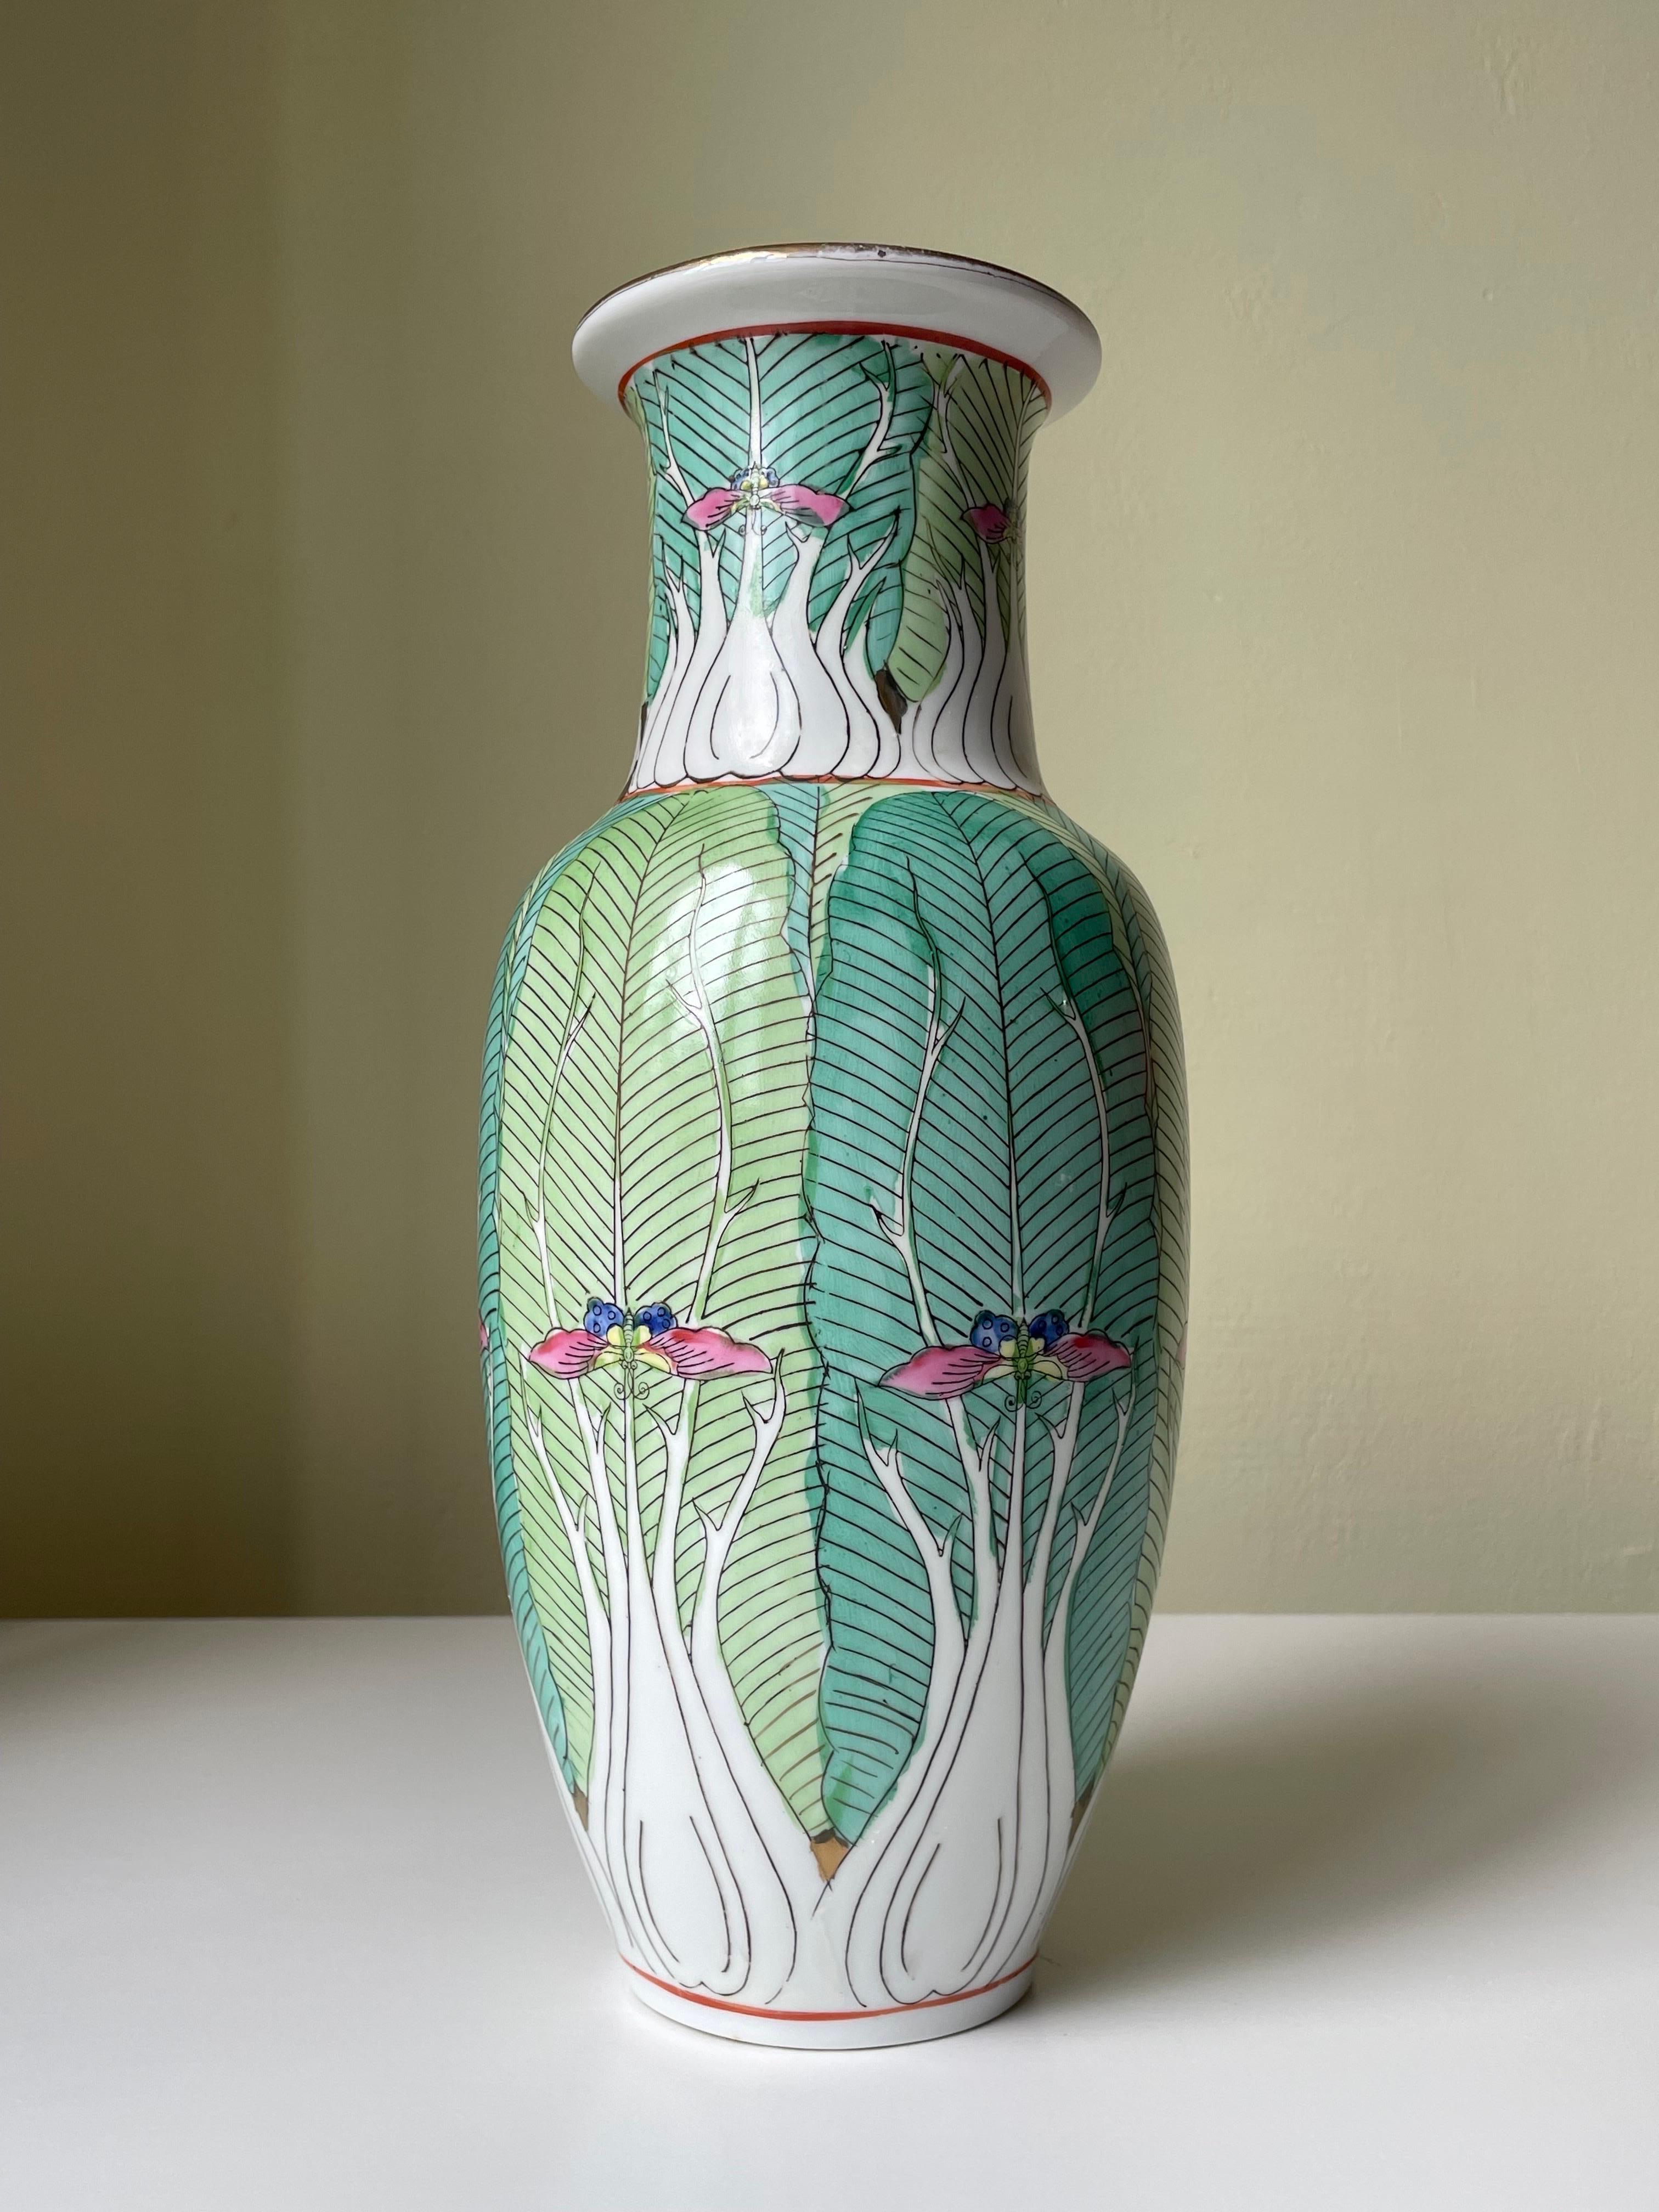 Large antique Chinese porcelain vase decorated with green, white and pink organic motifs with golden accents. Stylized art nouveau decorations of branches, leaves, roots and butterflies. Manufactured between 1890 and 1920 - possibly Famille Verte.